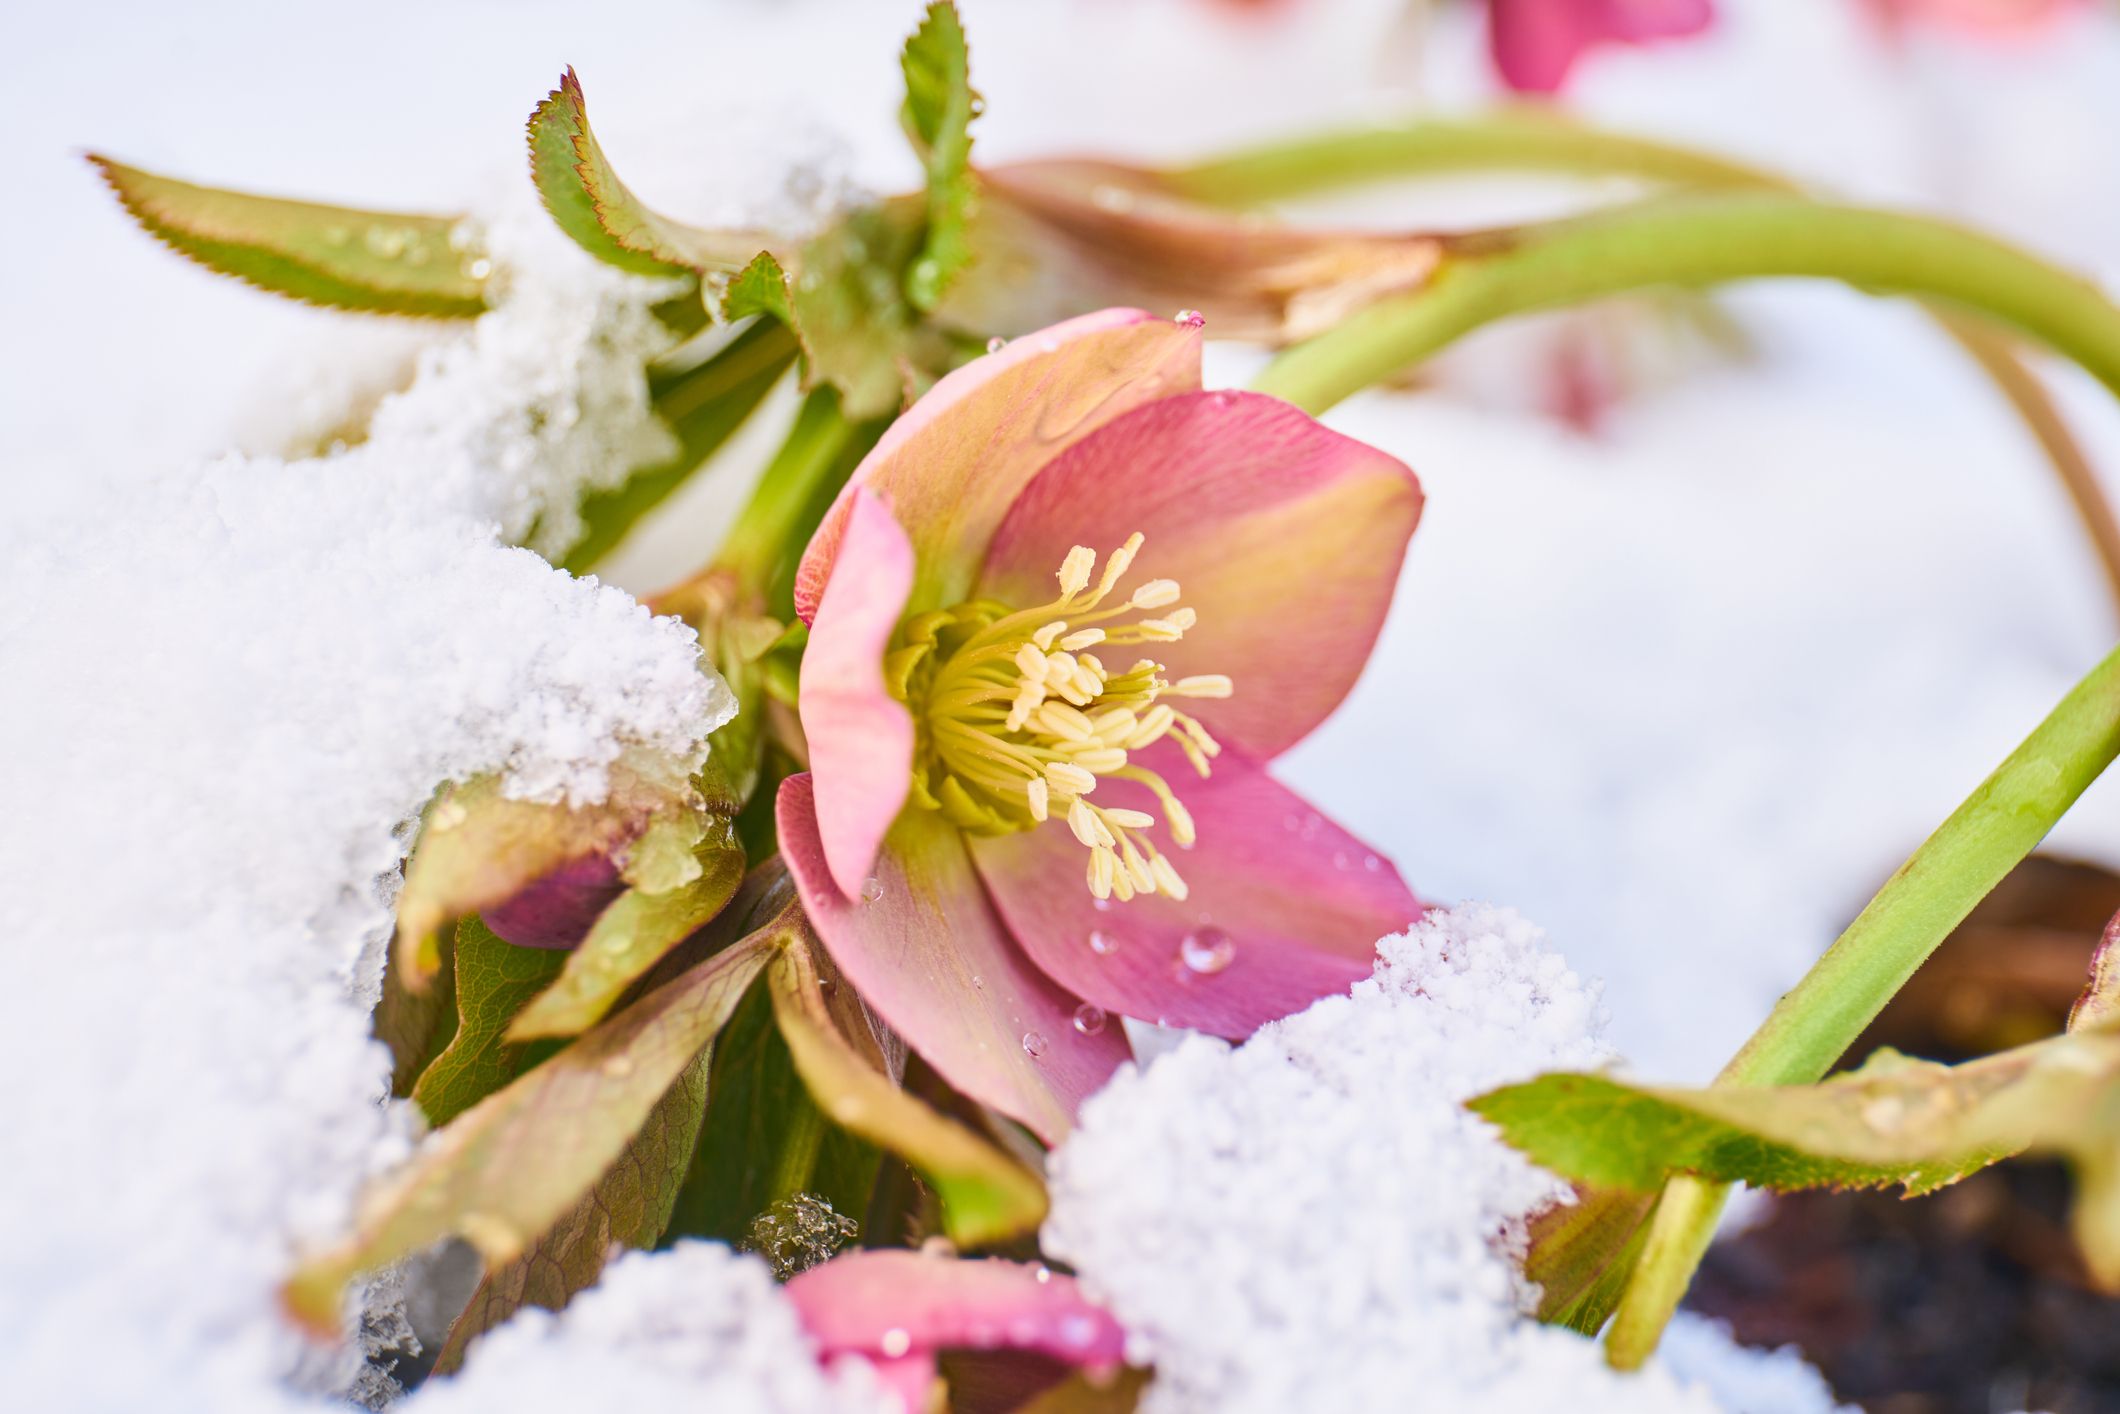 Winter flowers: Types and tips to grow and care